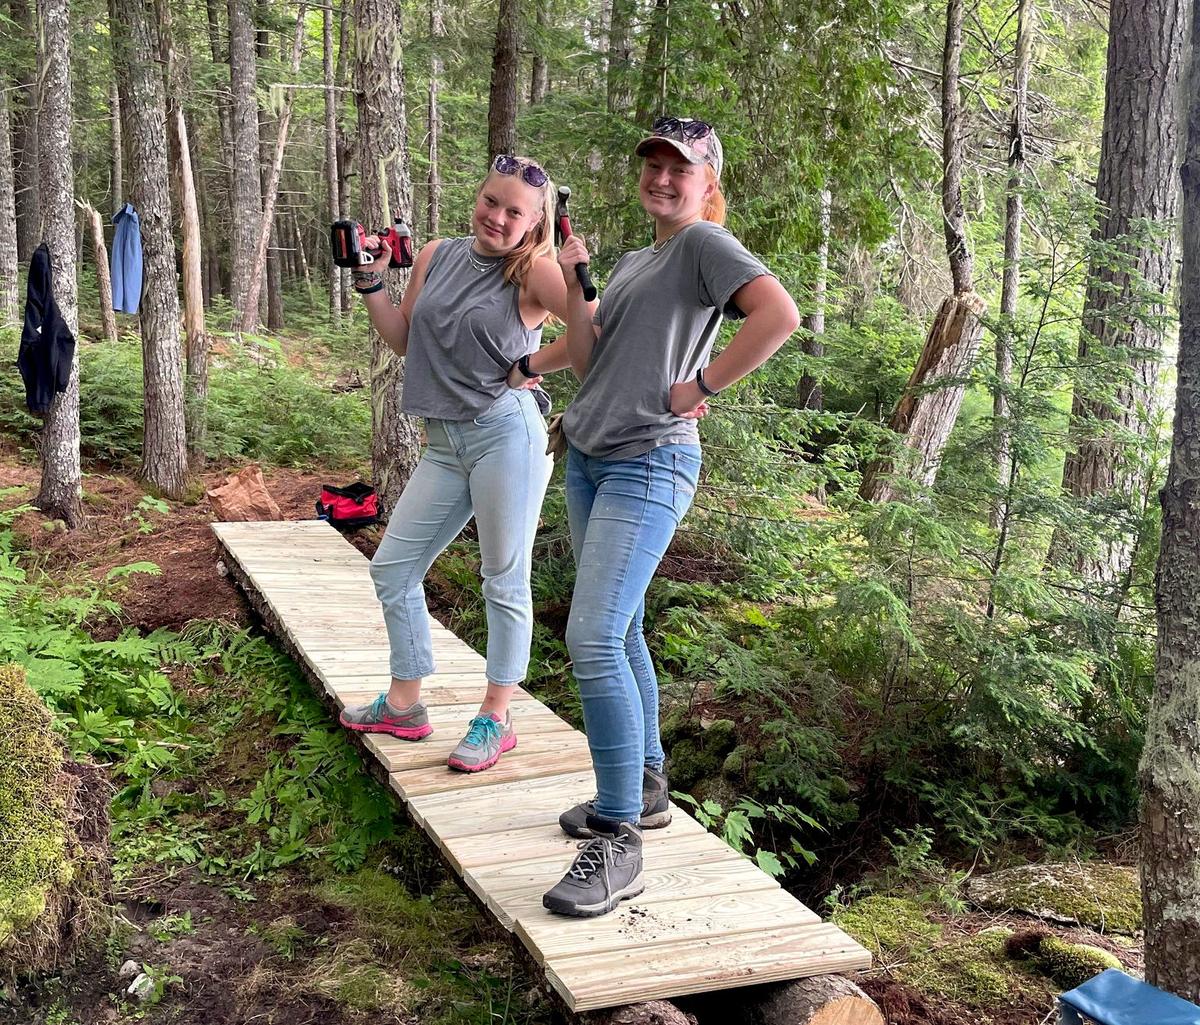 Volunteering for the Downeast Lakes Land Trust. Photo credit: Susan Bard.